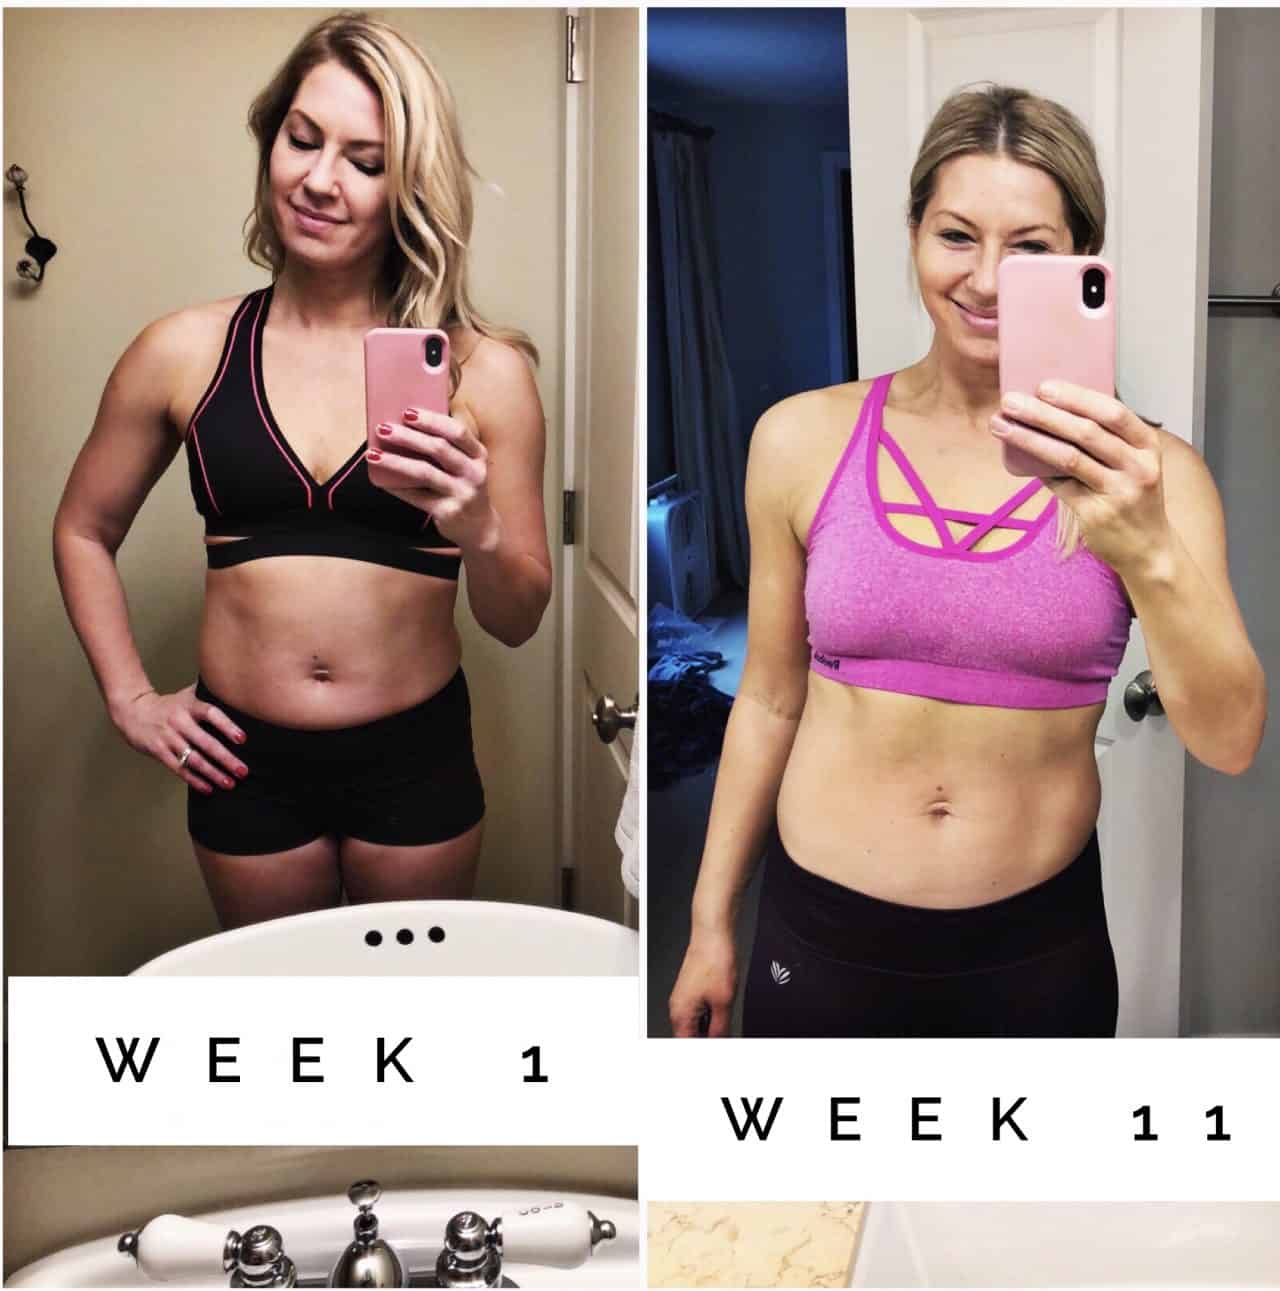 Week Eleven Review Of 80 Day Obsession,80 day obsession, 80 day obsession review, 80 day obsession fit mom, Fit mom 80 day obsession, Best 80 day obsession transformation, 80 day obsession transformation, 80 day obsession mom, 80 day obsession moms, Review of 80 day obsession, Lose weight with 80 day obsession, How 80 day obsession works